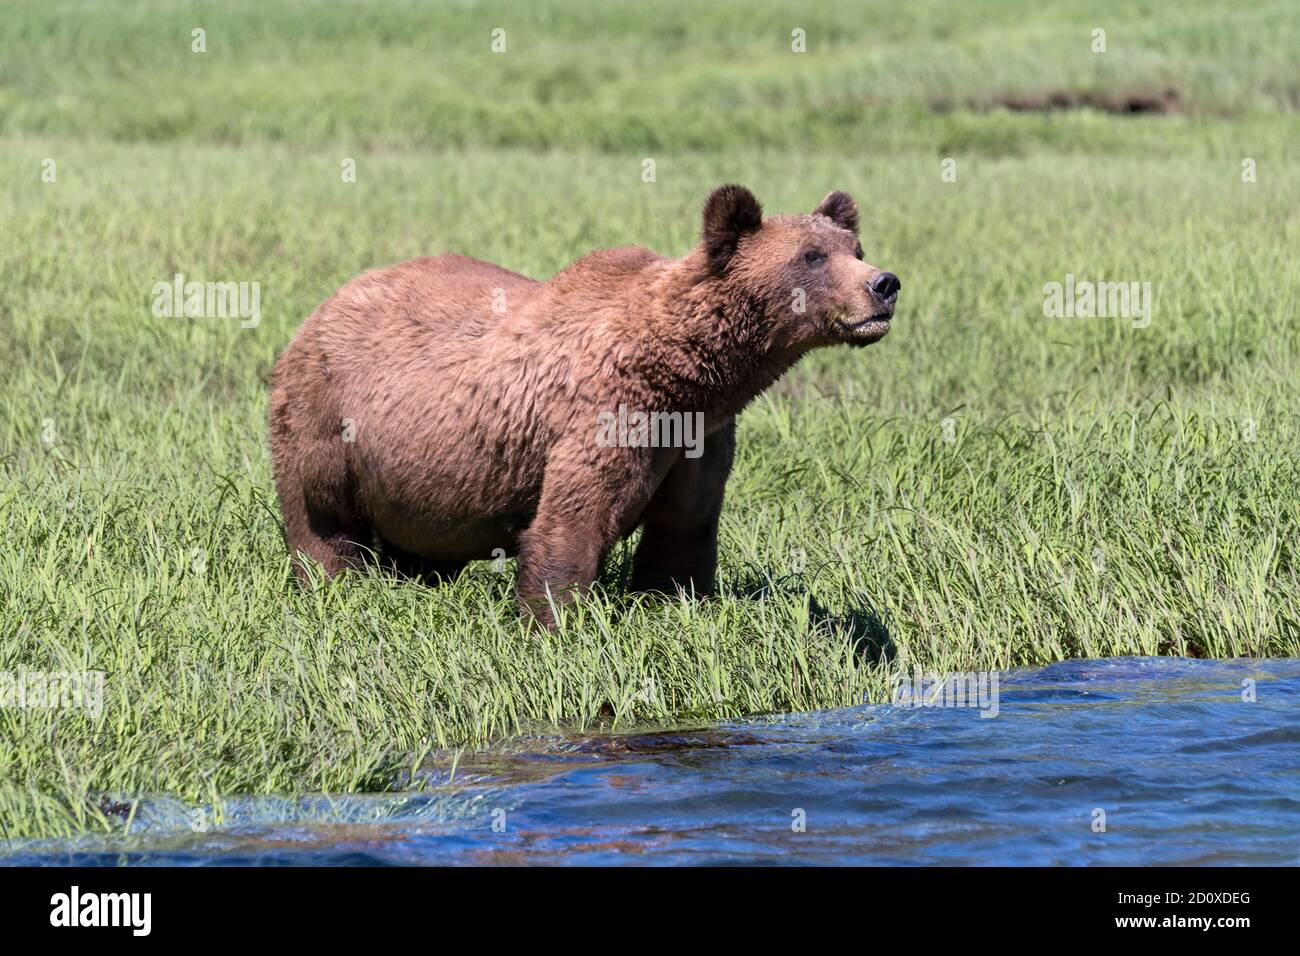 Grizzly bear at the water's edge, Khutzeymateen estuary, BC Stock Photo